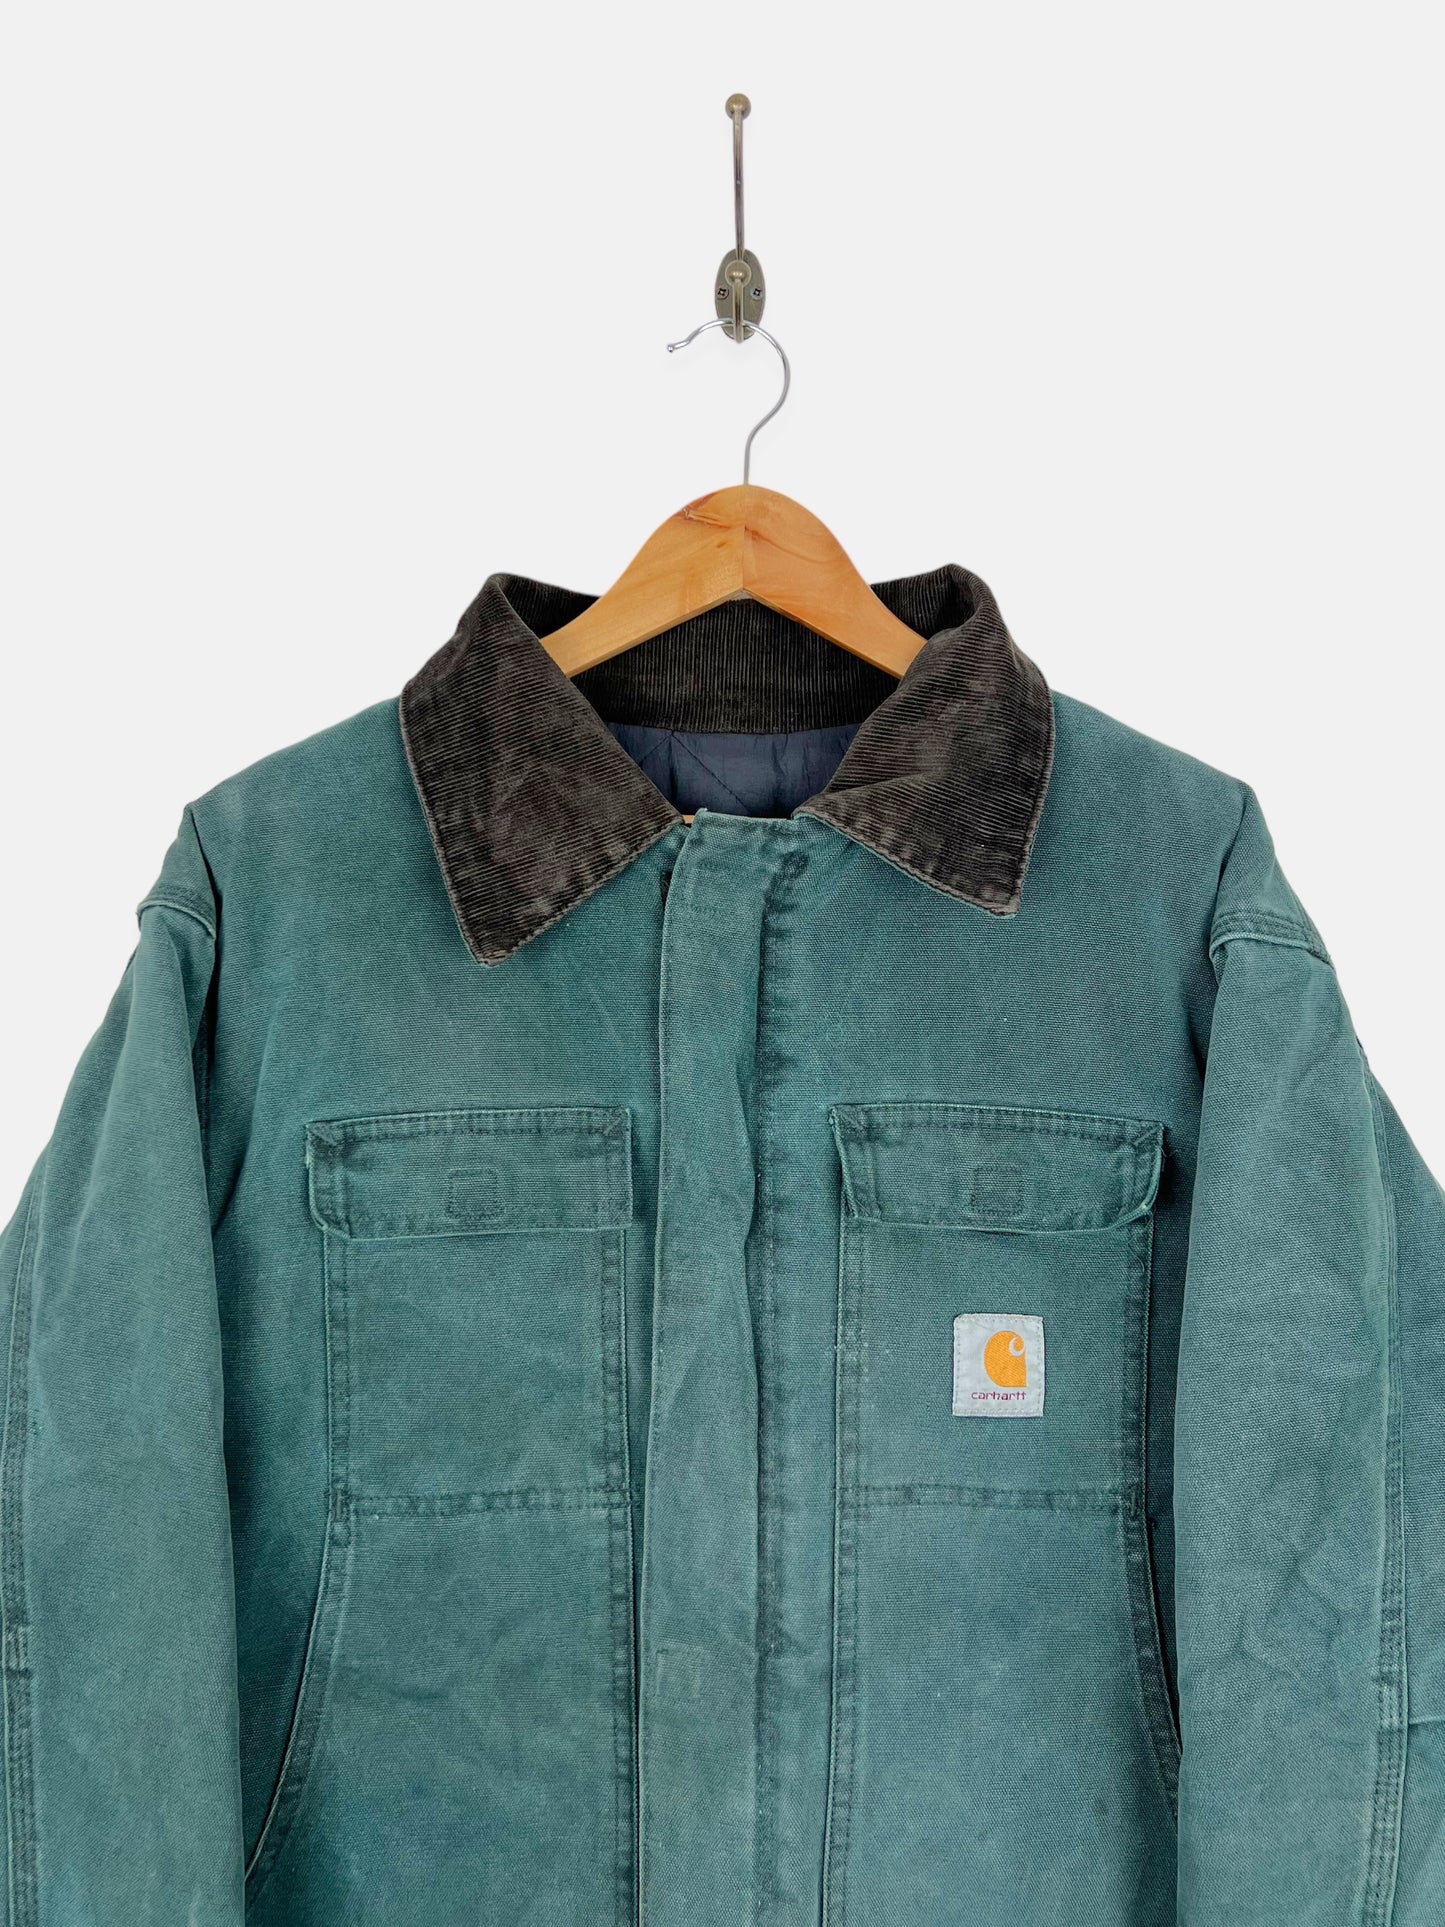 90's Carhartt Heavy Duty USA Made Quilt Lined Vintage Corduroy Collar Jacket Size XL-2XL